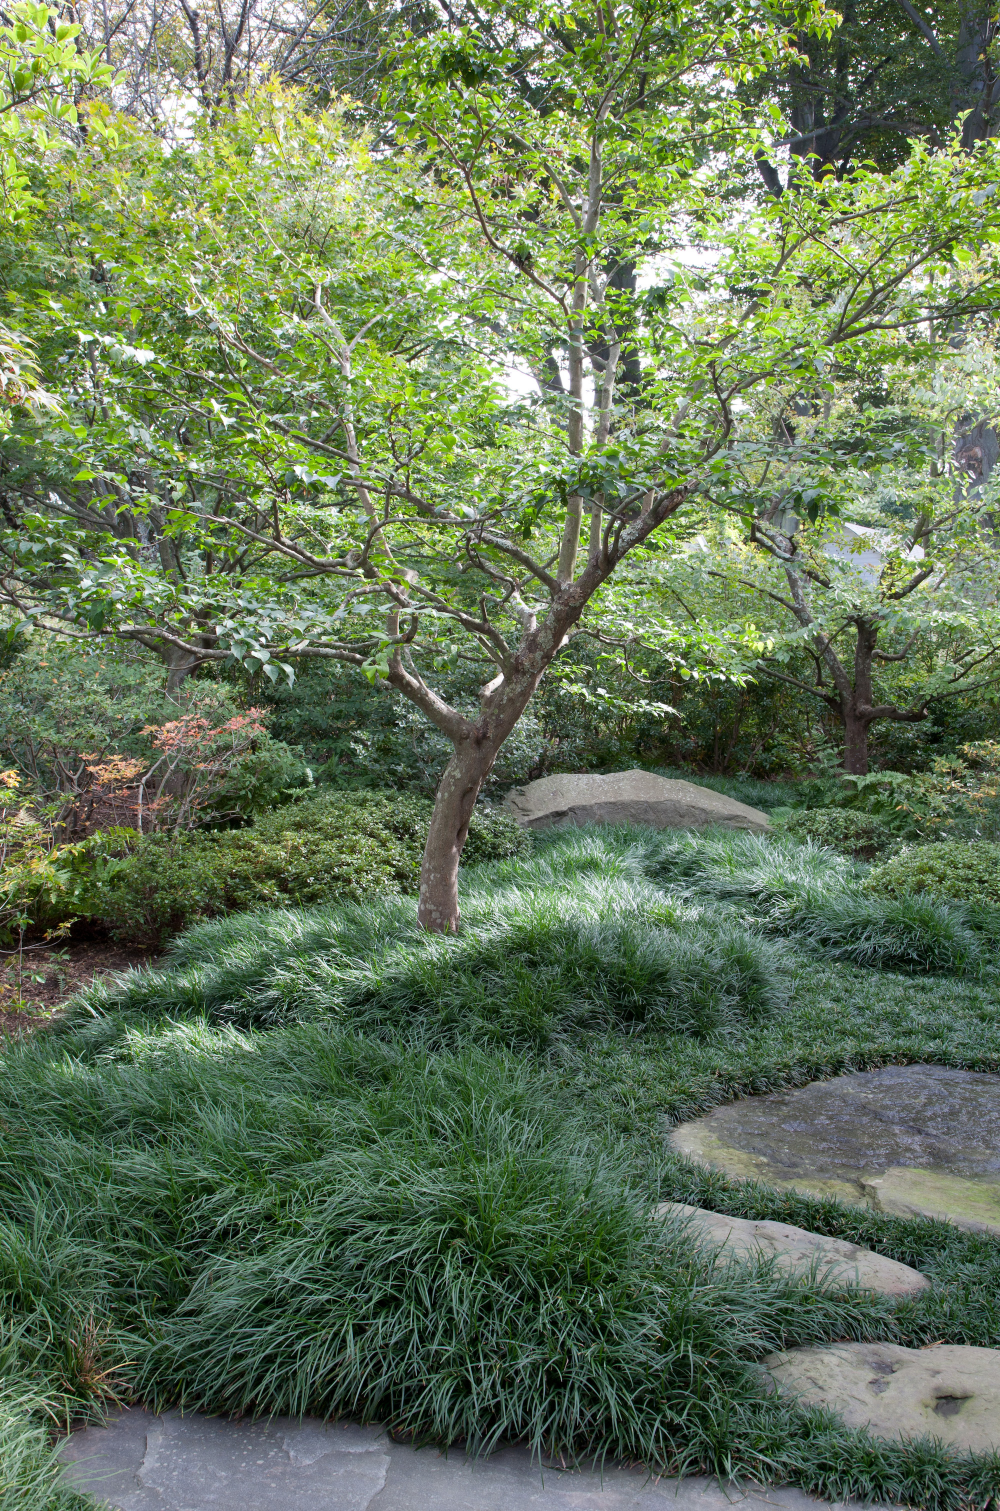 The Art of Japanese Garden Design: Harmony and Tranquility in Nature